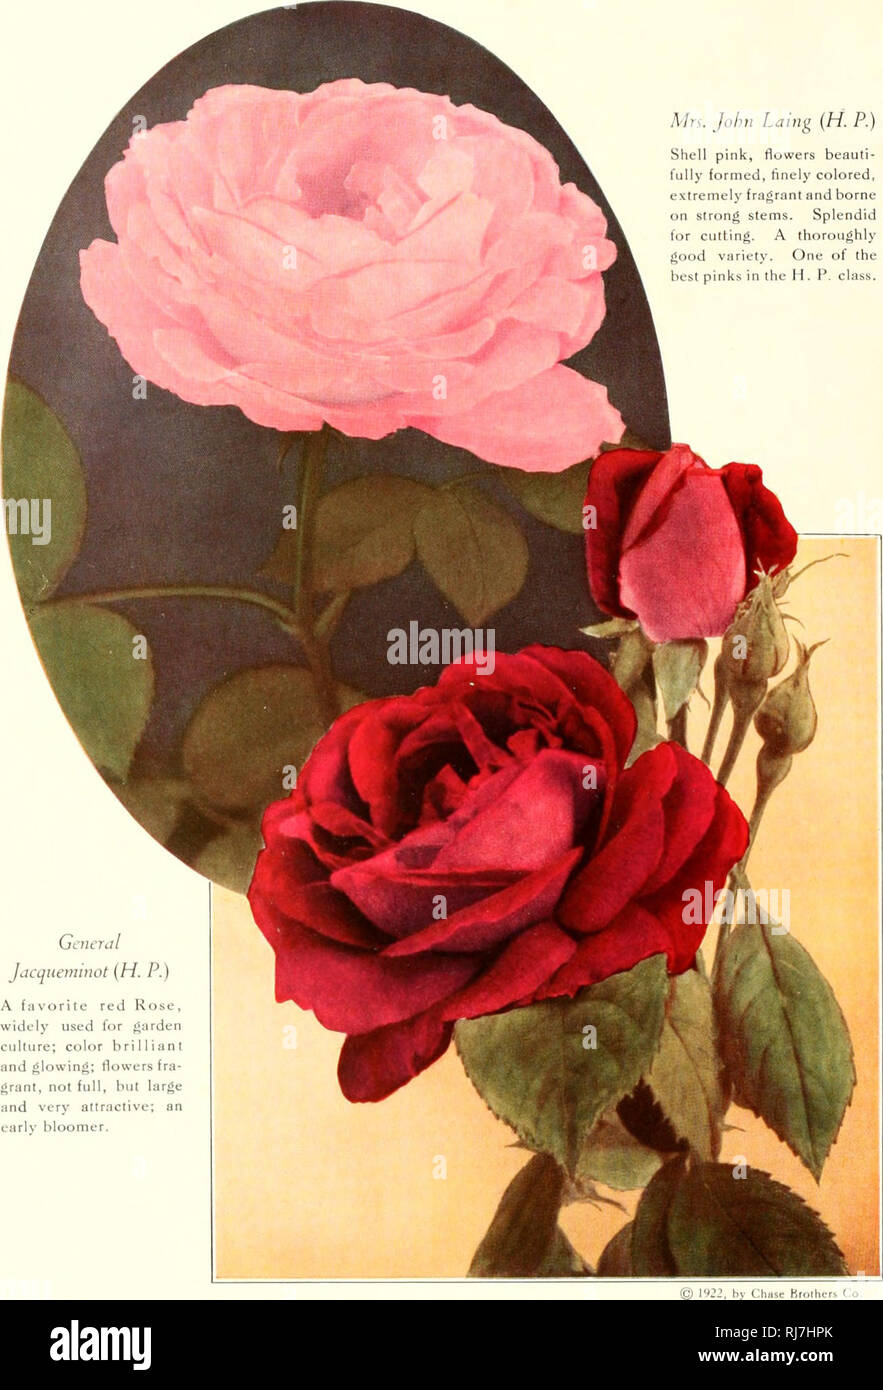 . Chase fruit and fowers in natural colors;. Fruit; Flowers; Nursery stock. General Jacqueminot {H. P.) A favorite red Rose, widely used for garden culture; color brilliant and glowing; flowers fra- grant, not full, but large and very attractive; an earlv bloomer. Mn. John Laing (H. P.) Shell pink, flowers beauti- fully formed, finely colored, extremely fragrant and borne on strong stems. Splendid for cutting. A thorougfily good variety. One of tfie best pinks in tfie H . P. class.. 1W2. by Chase Brolhers Co. 56. Please note that these images are extracted from scanned page images that may hav Stock Photo